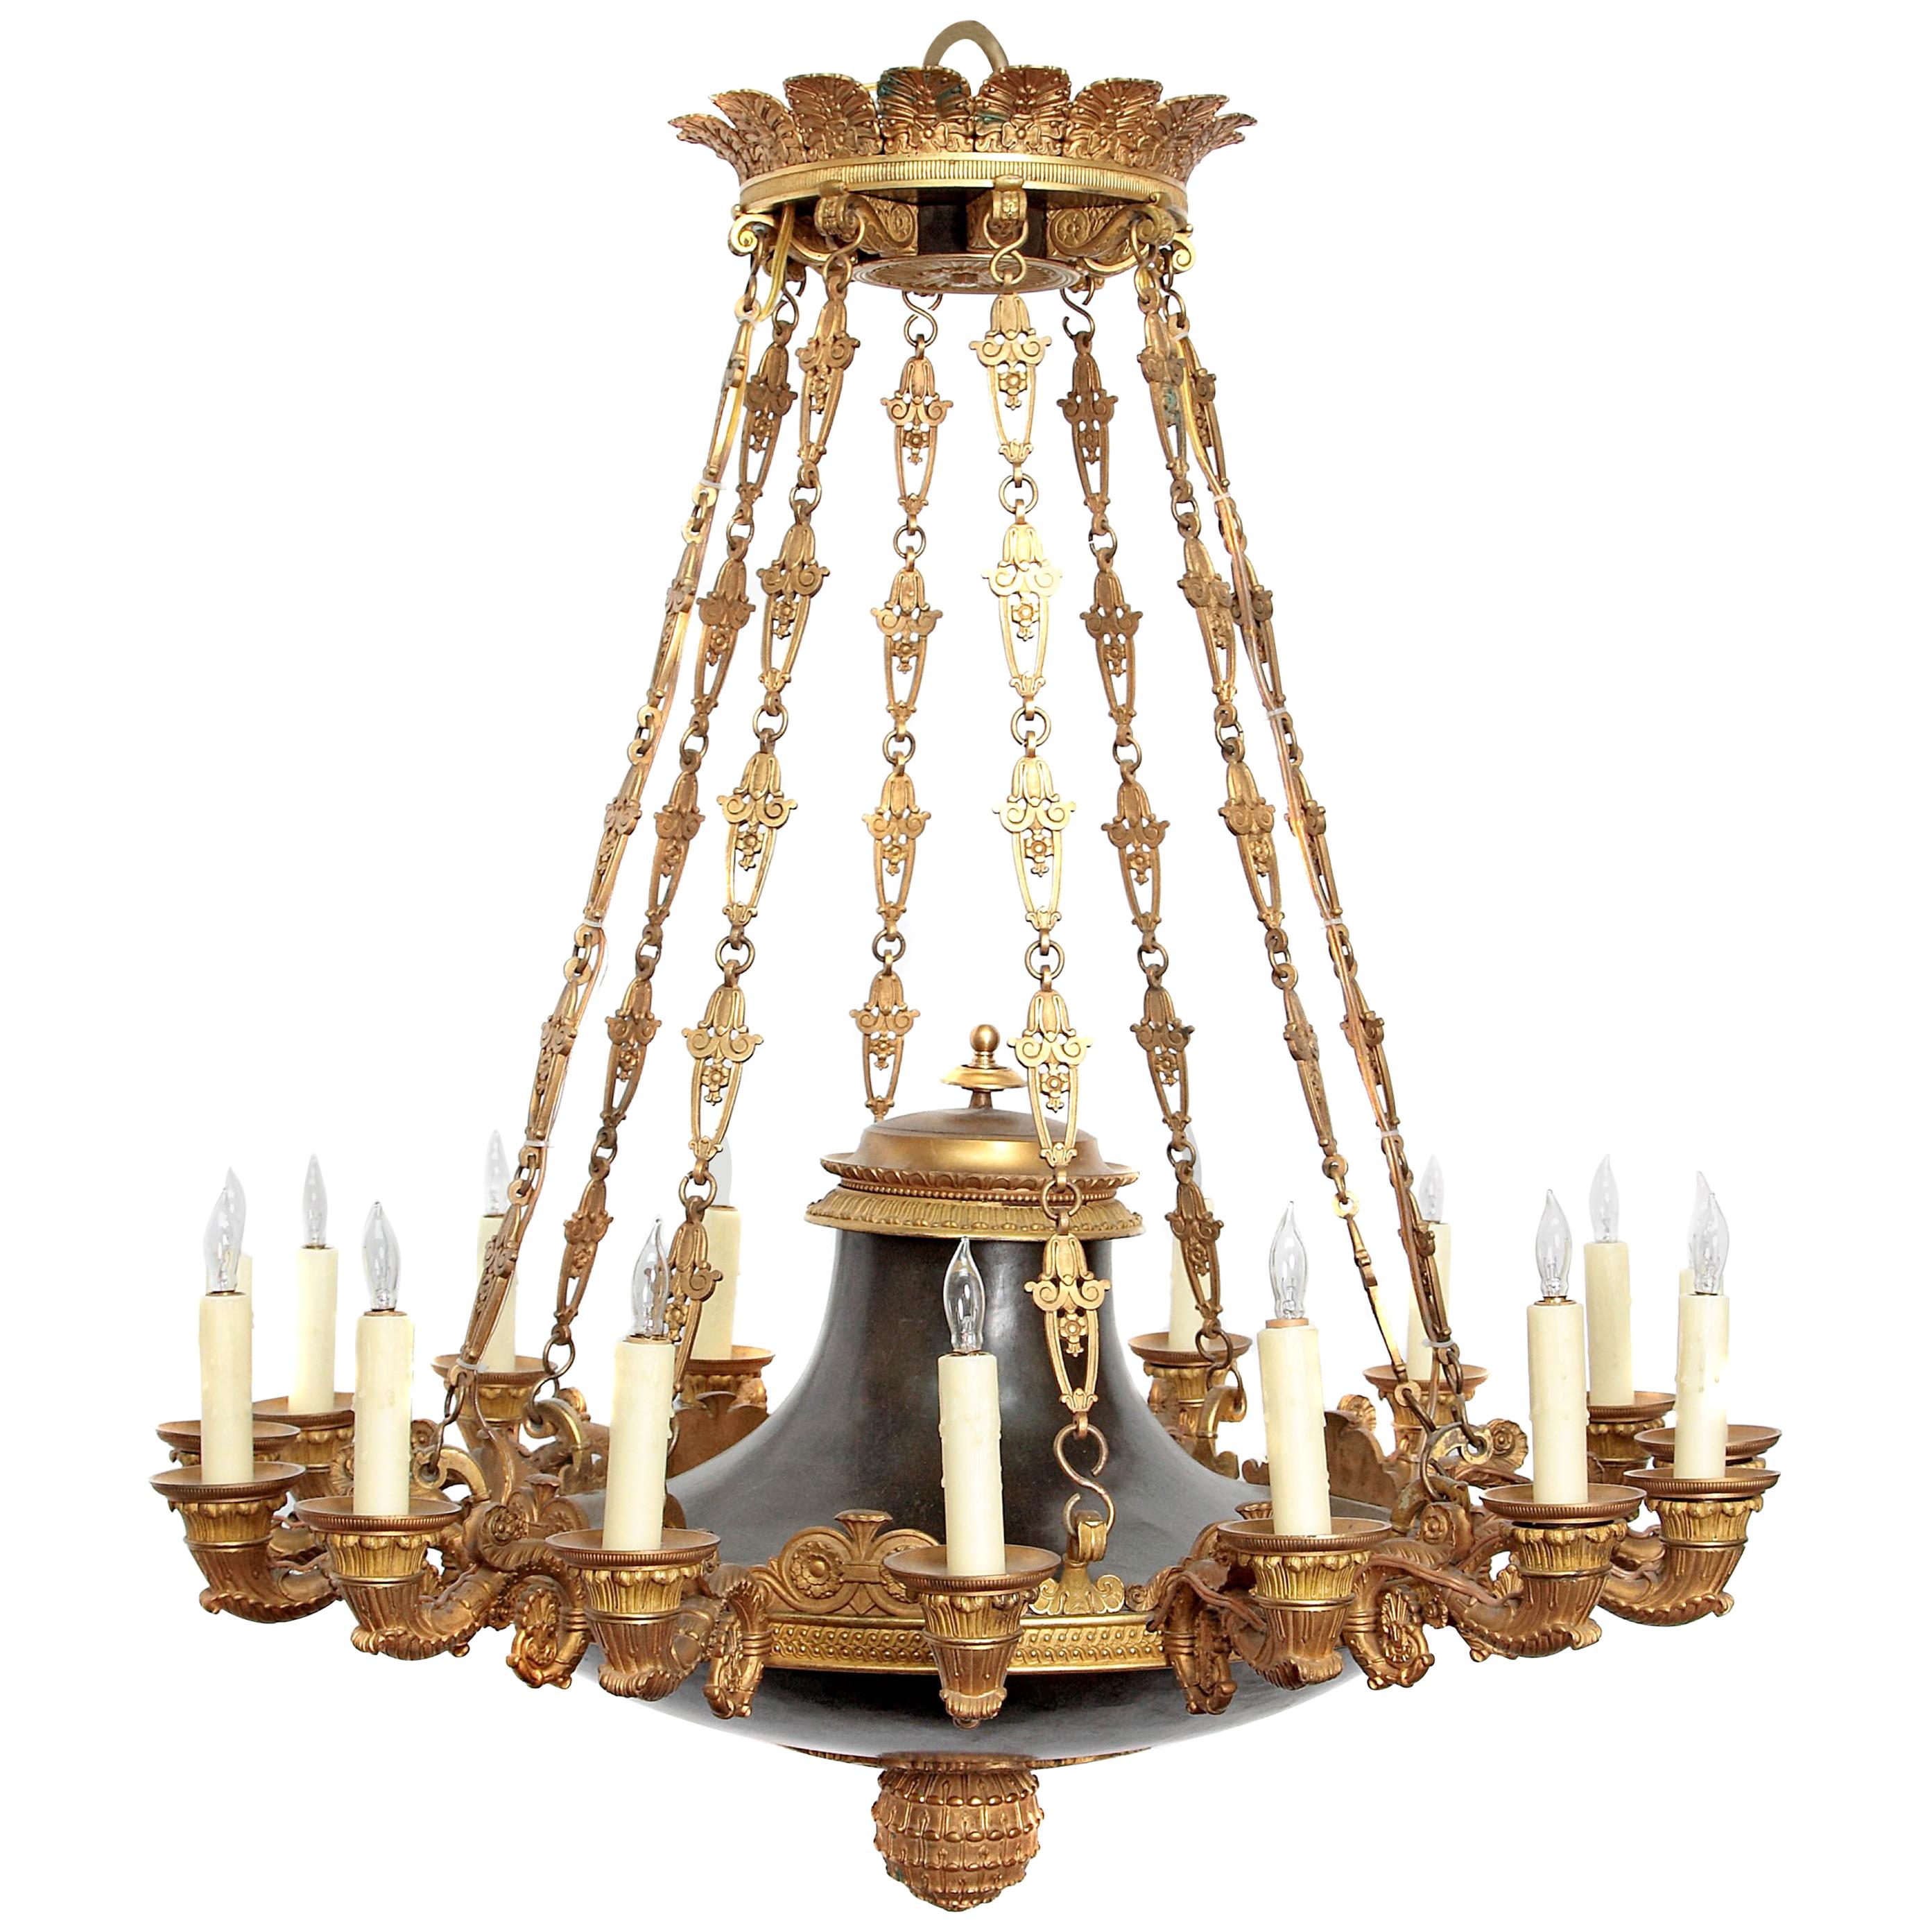 French Empire Patinated and Gilt Bronze Argon Chandelier / 16 Lights